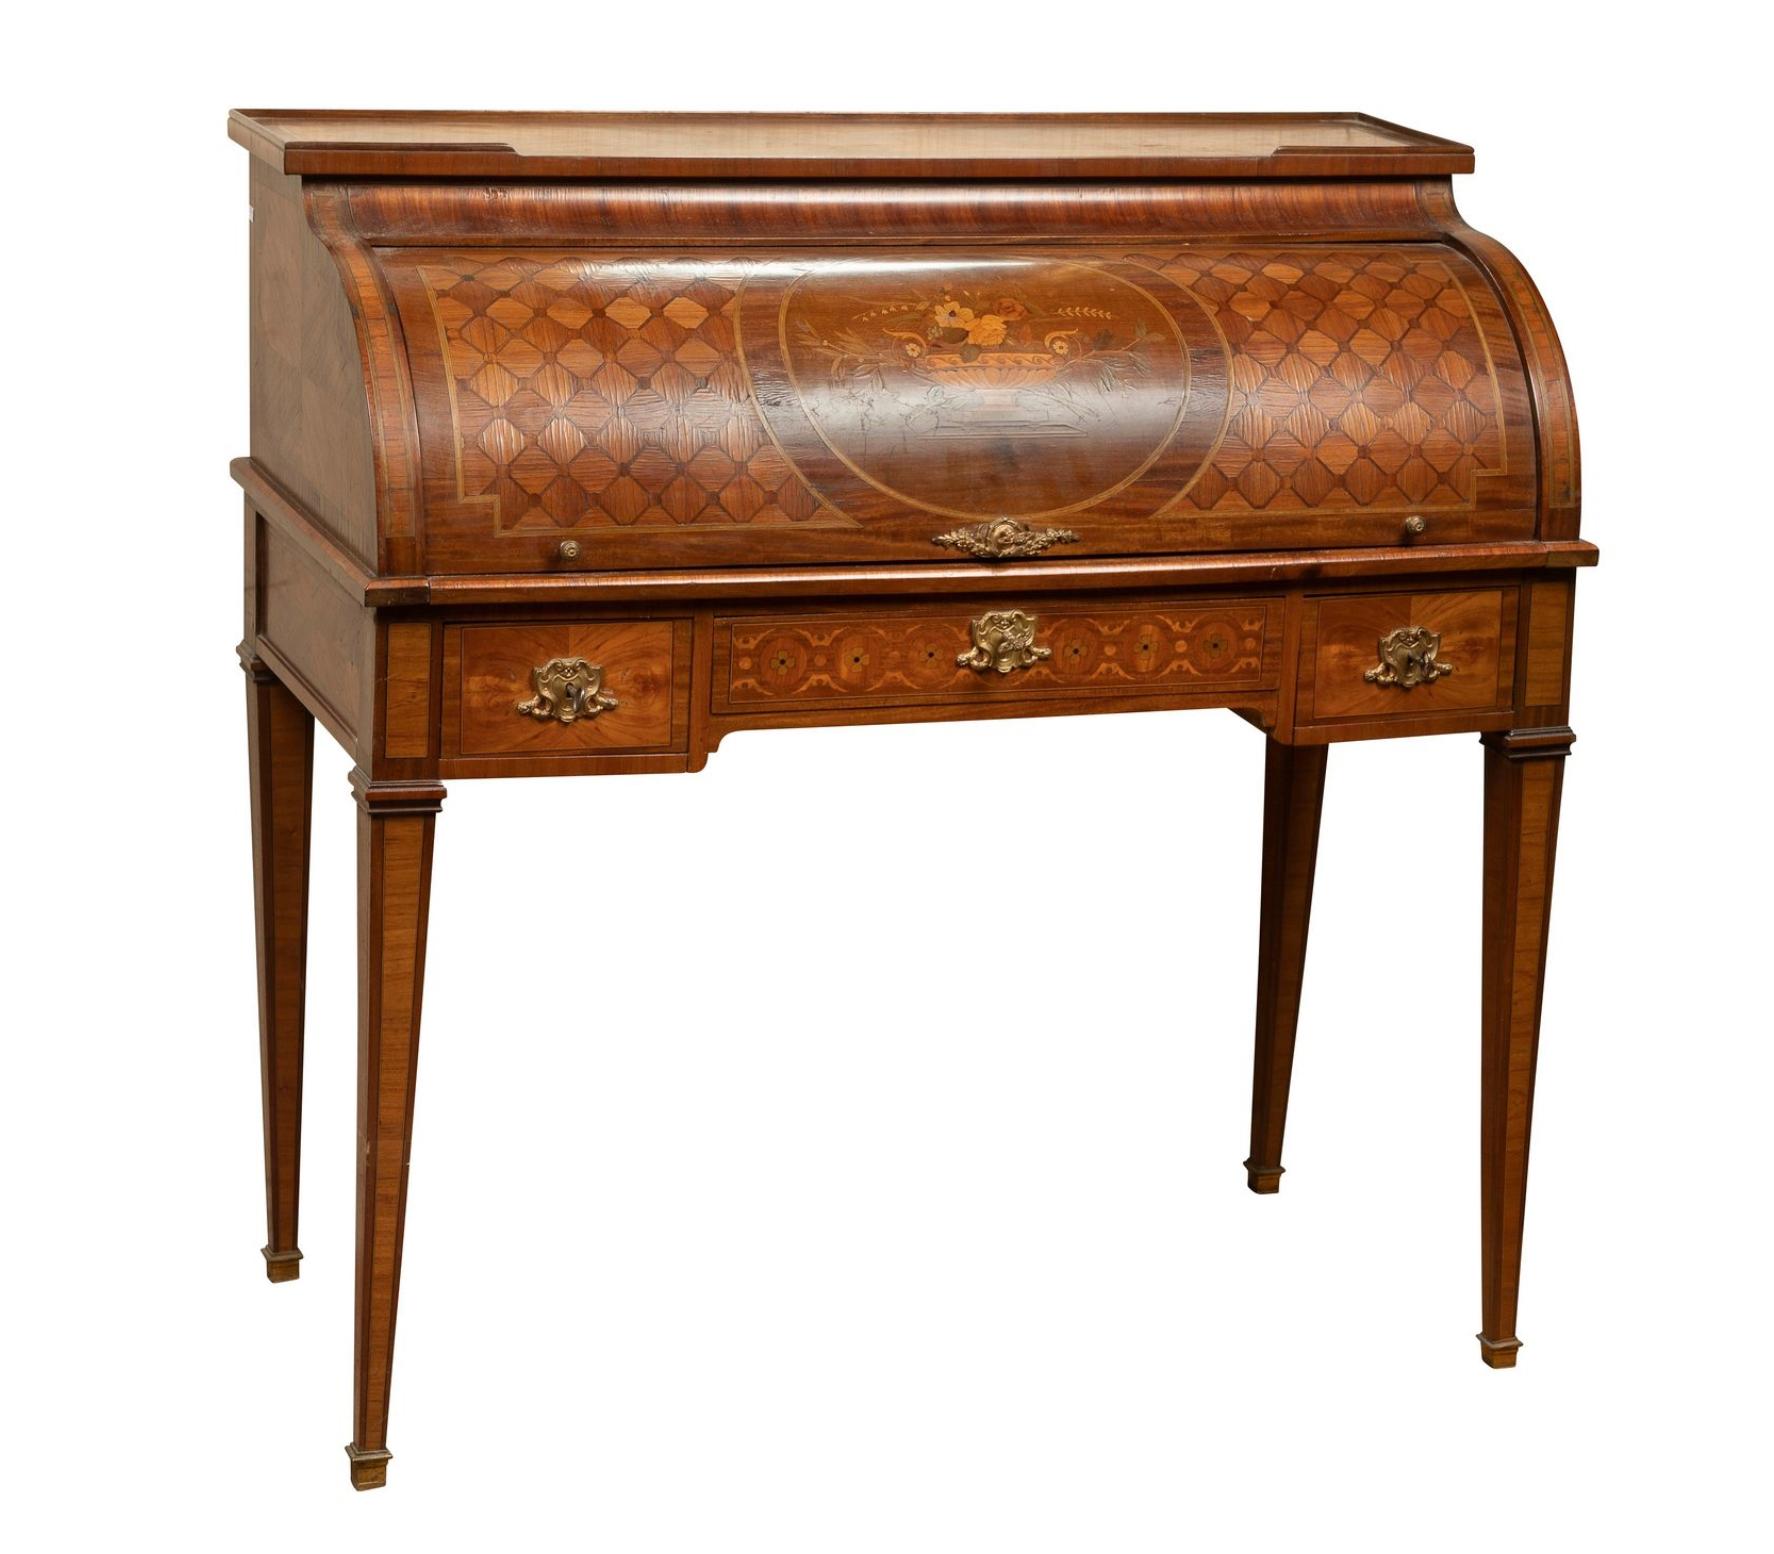 Mahogany and mahogany veneer cylinder desk, adorned with a medallion centered with a trophy, the apron opening with three drawers.
Louis XVI Style, 19th Century Period
Very good condition.